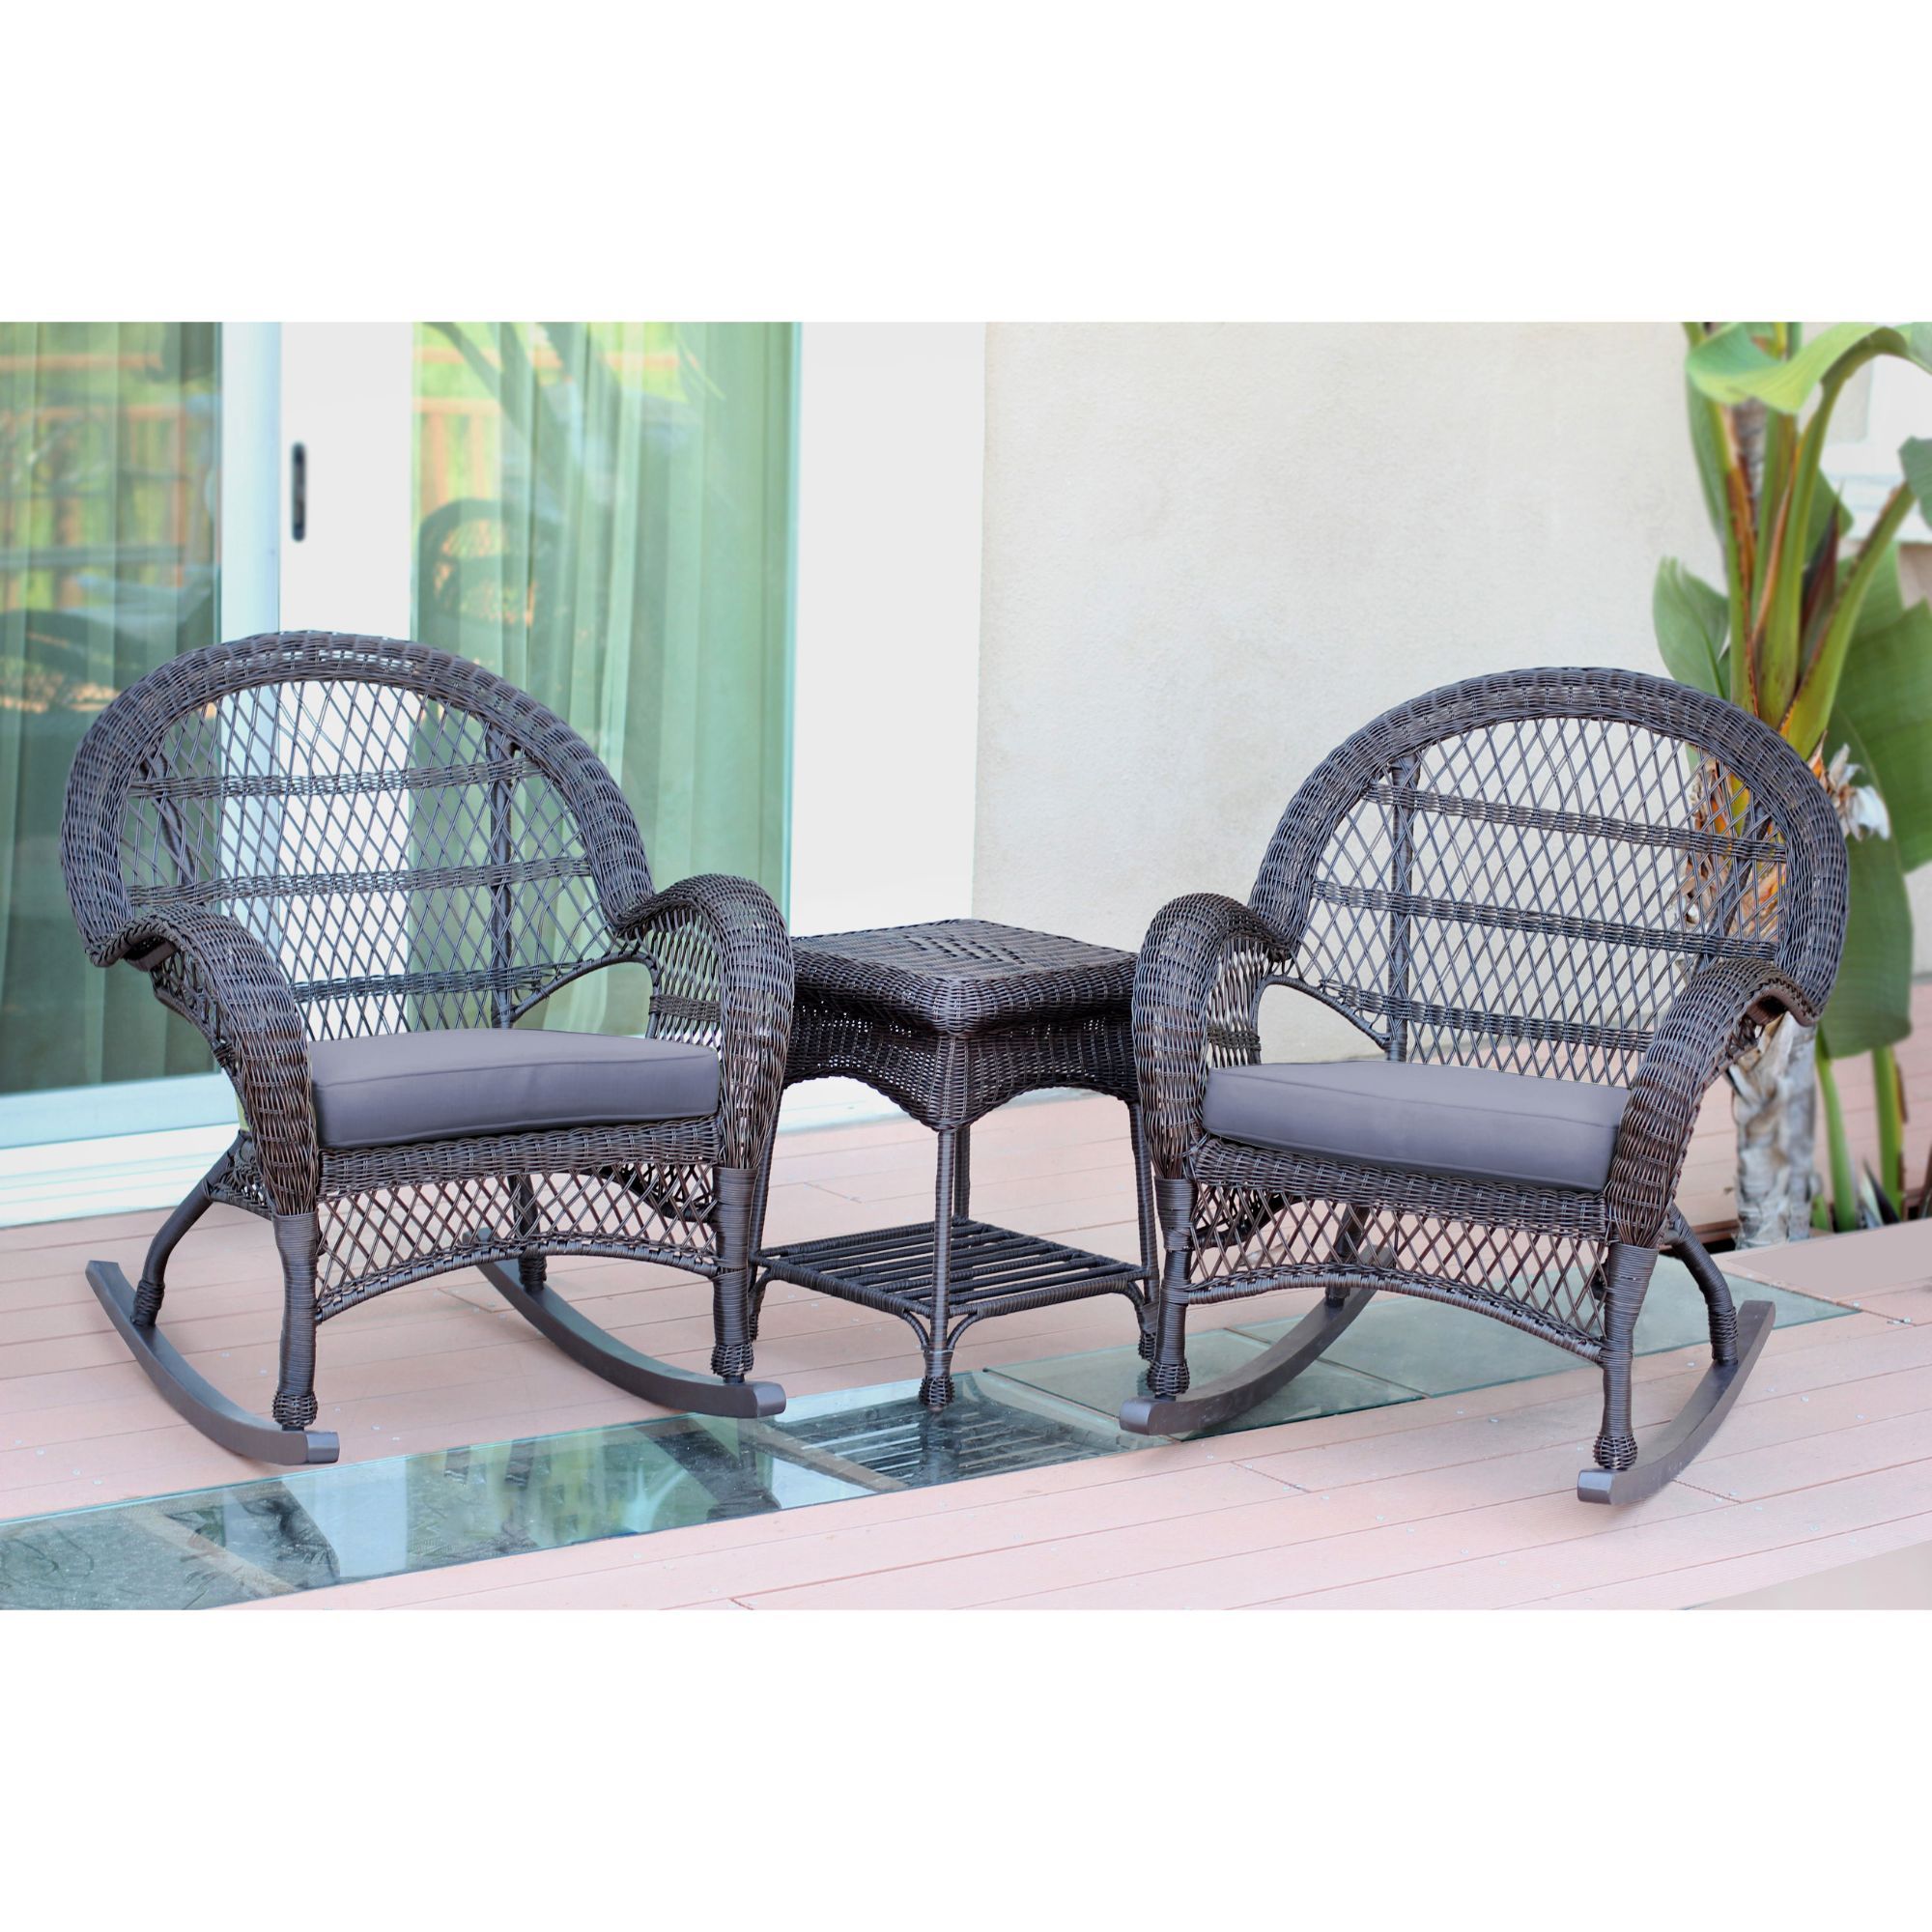 3 Piece Espresso Brown Outdoor Furniture Patio Conversation Set – Steel With Regard To Brown Patio Conversation Sets With Cushions (View 10 of 15)